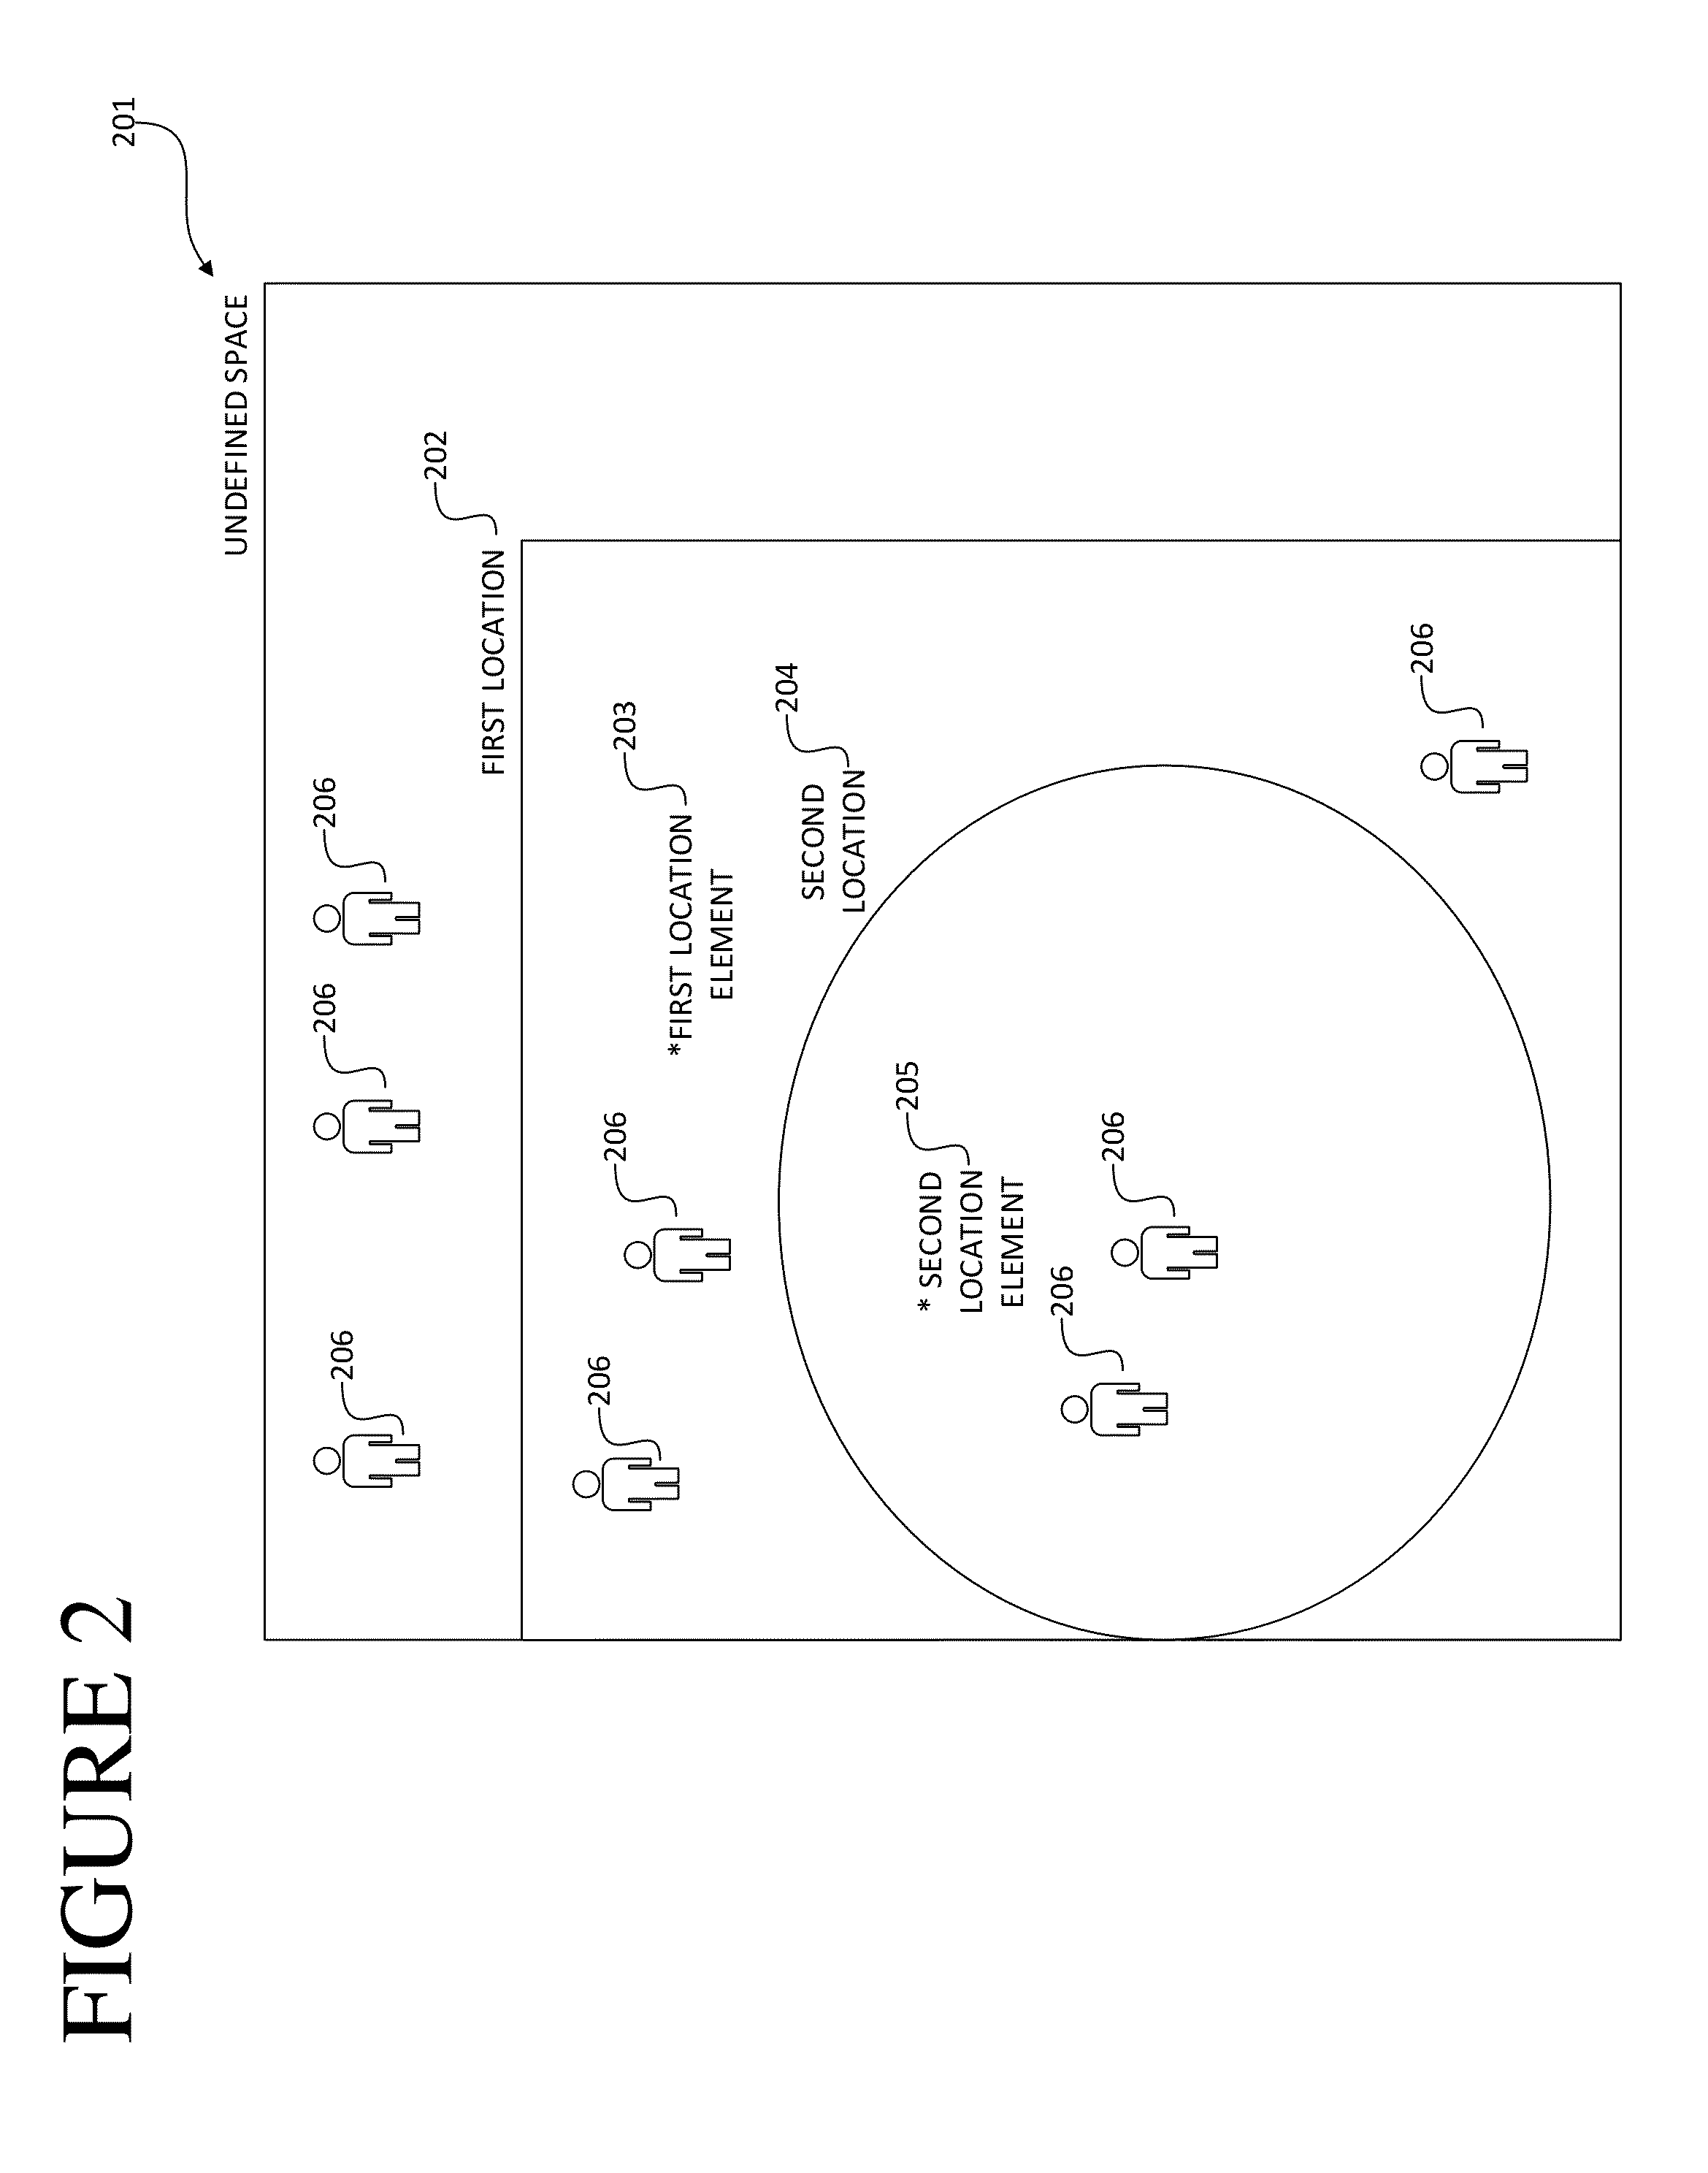 Location-based communication and interaction system